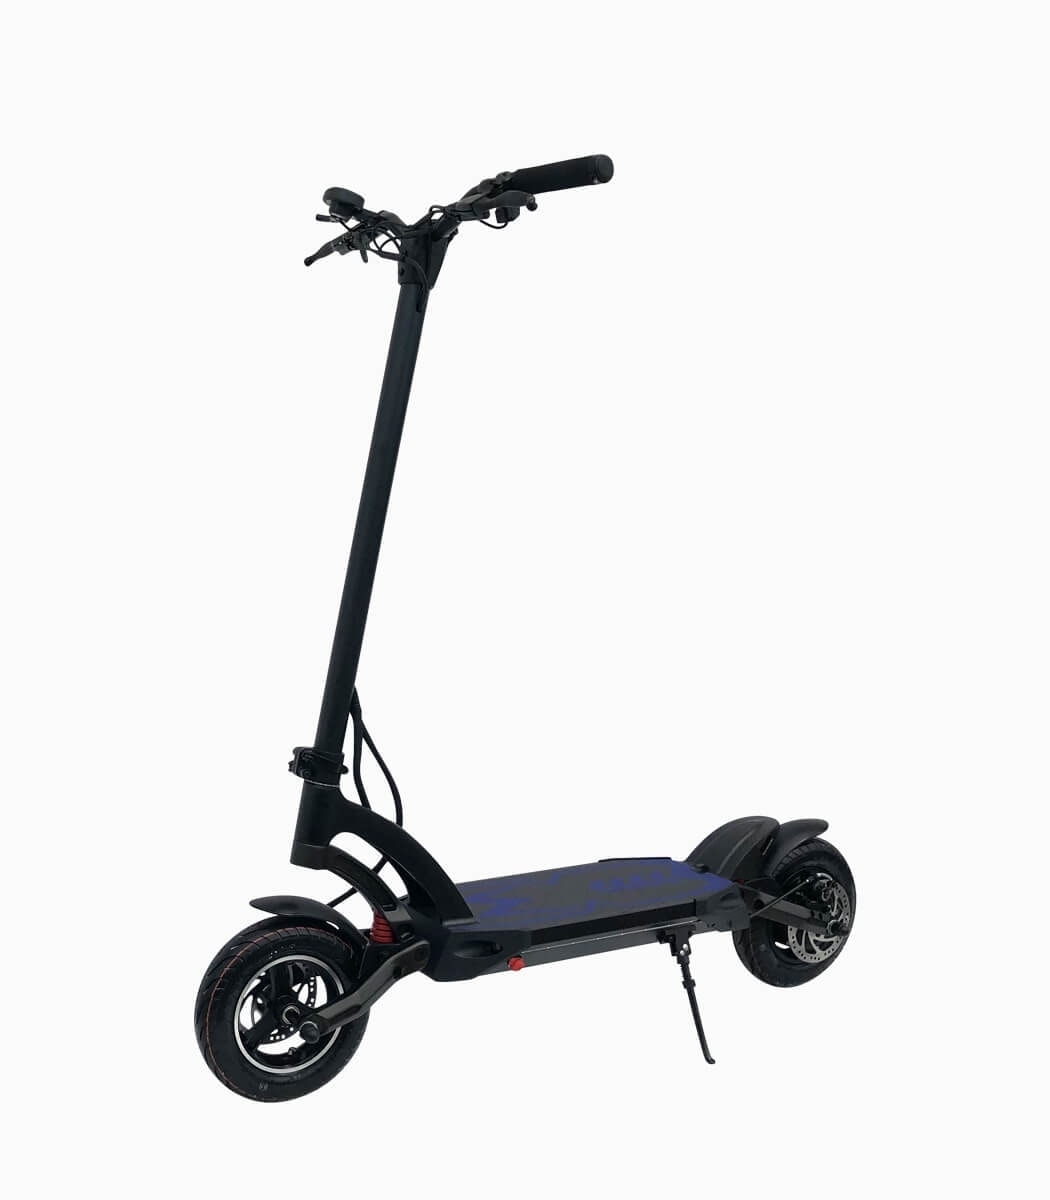 MOBOT MANTIS (BLACK10AH) UL2272 certified high performance electric scooter angled left